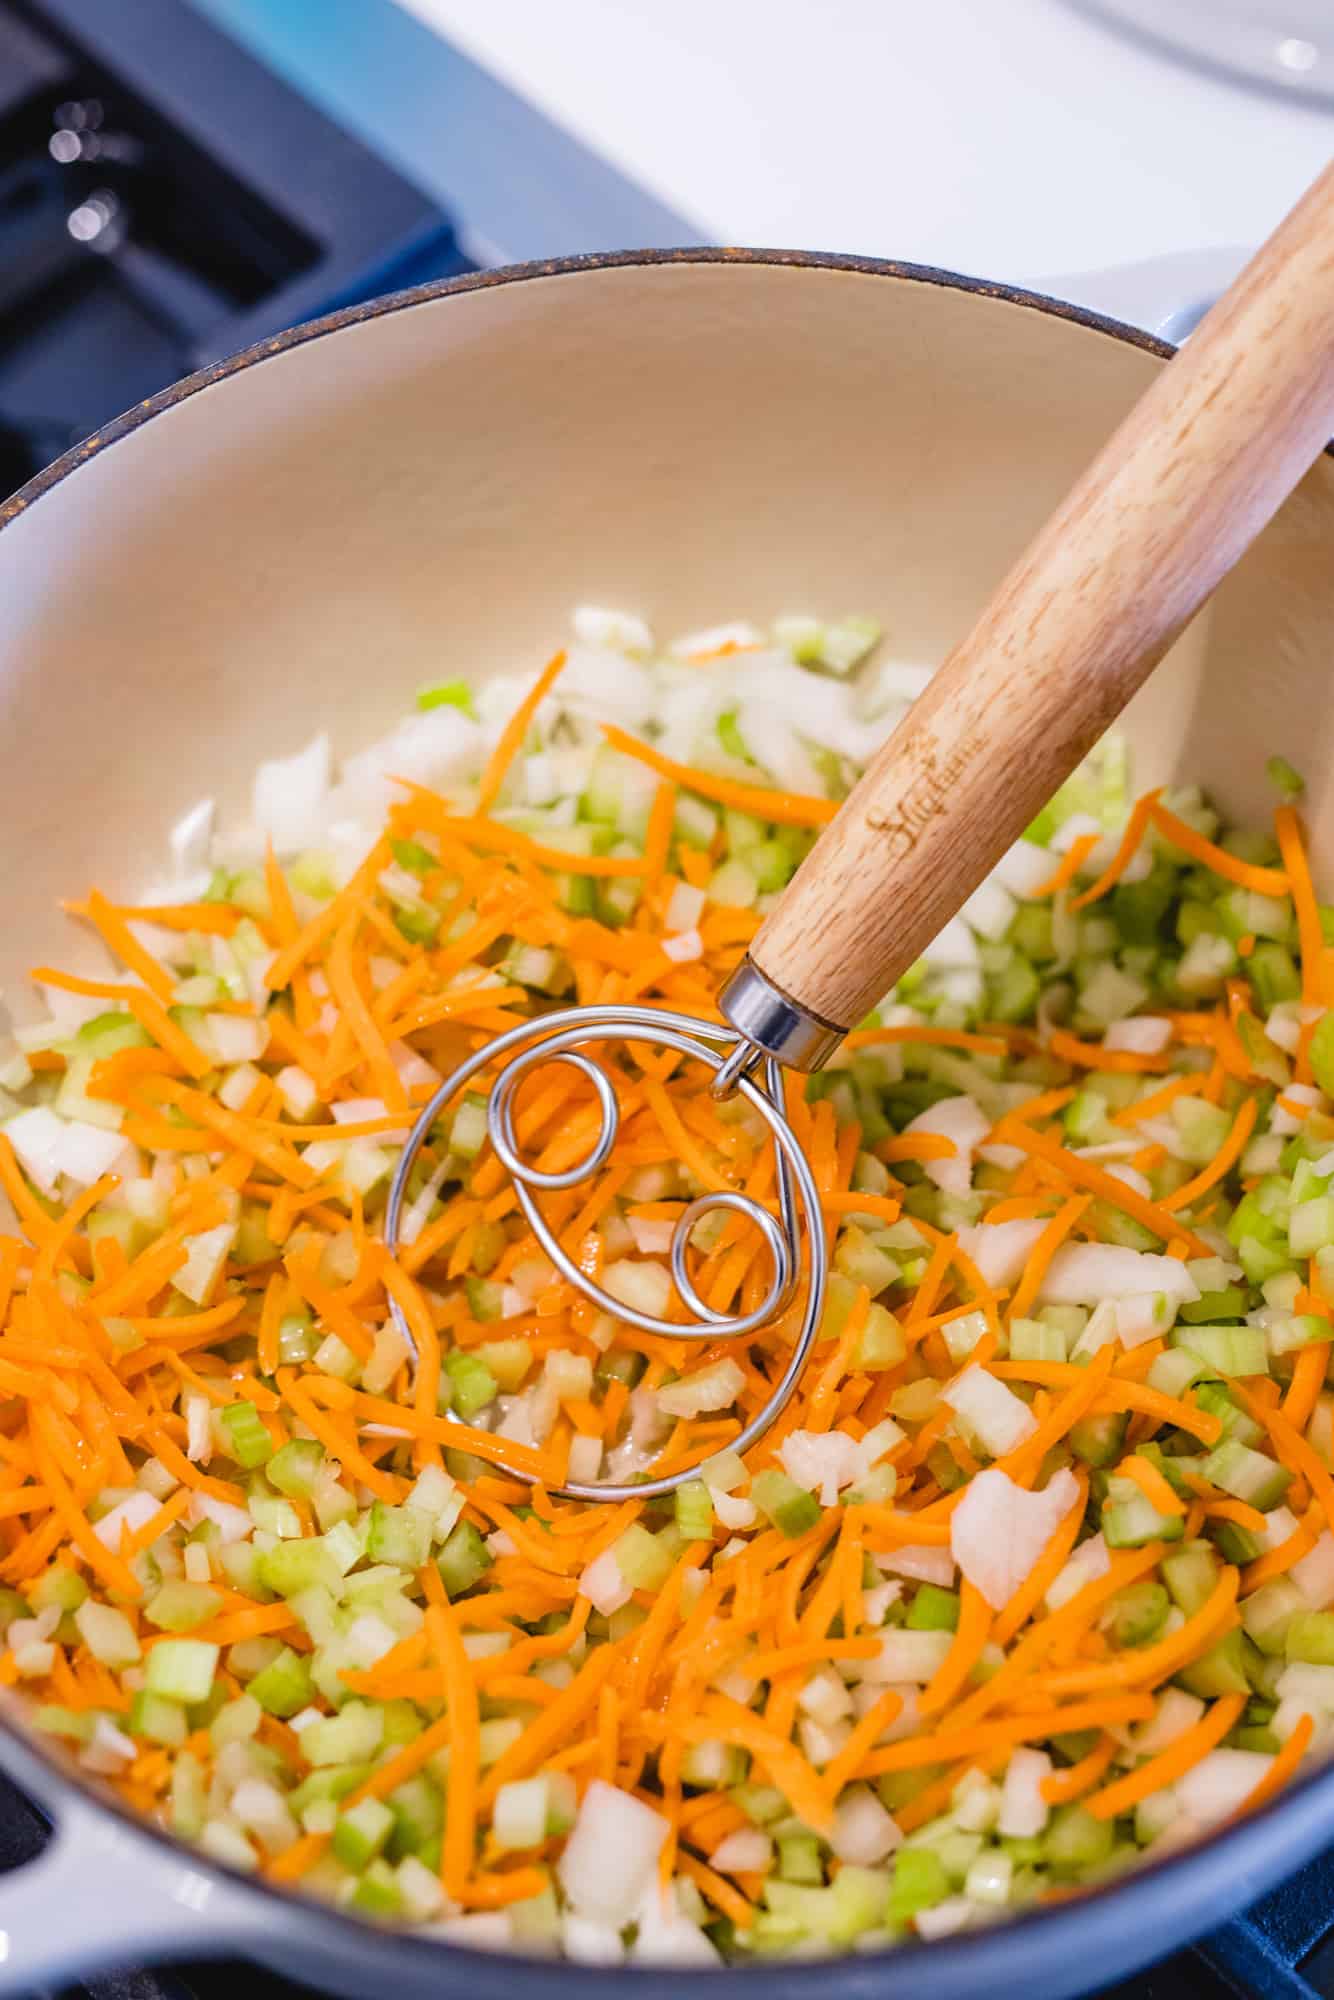 Diced carrots, celery, and onions sit in a pot to be sautéed.